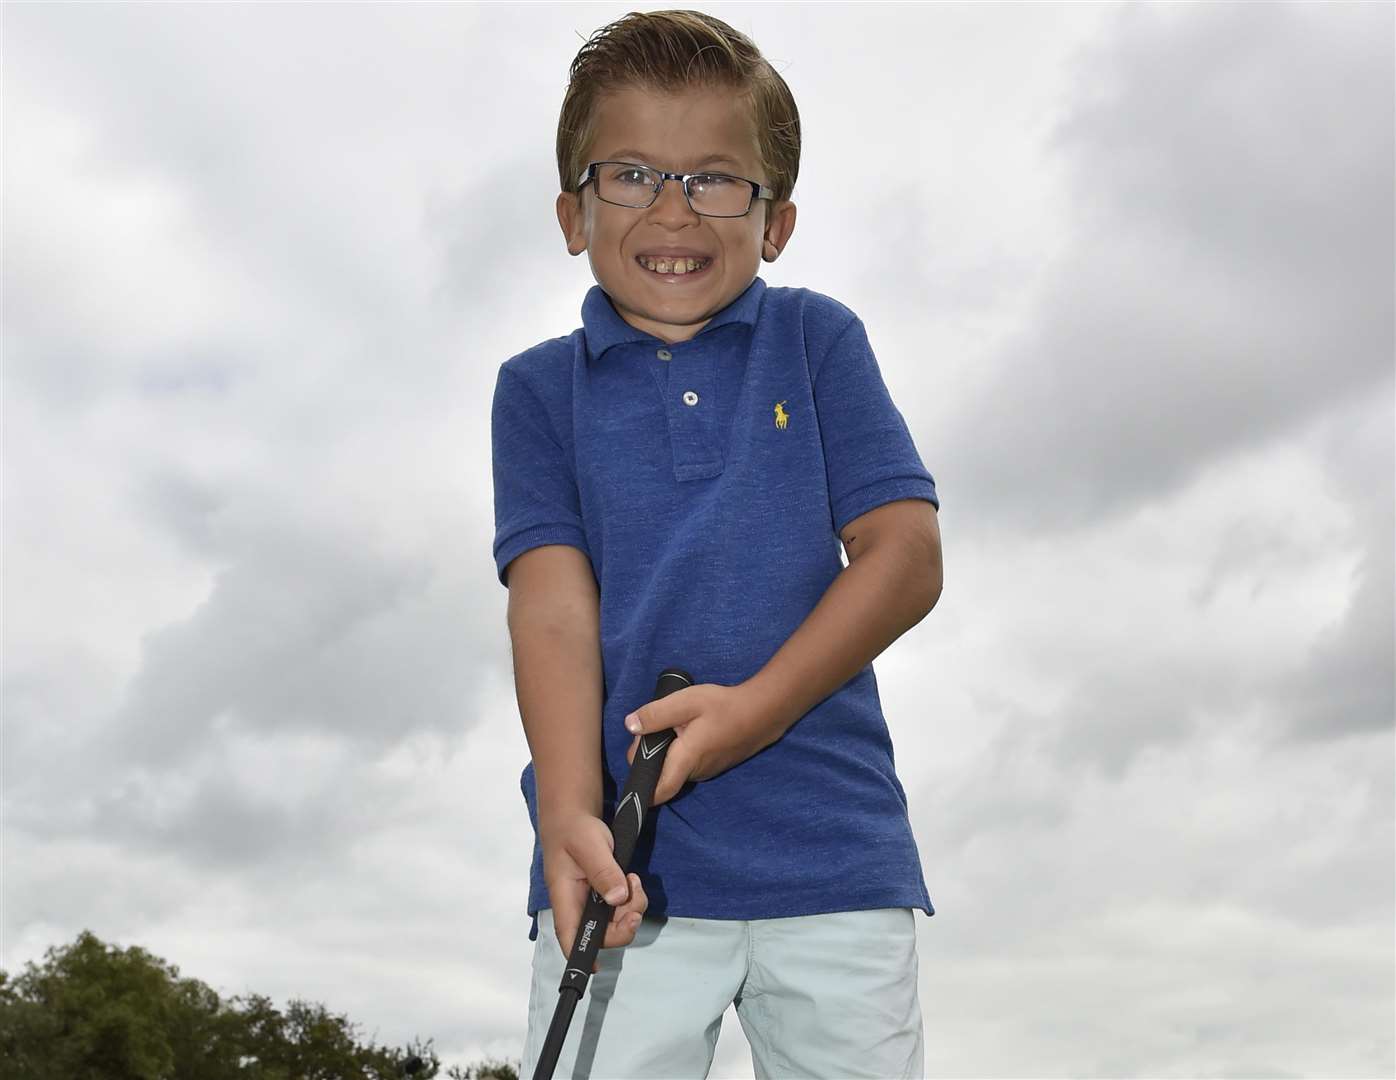 Ethan taking part in a charity day held at Chestfield Golf Club